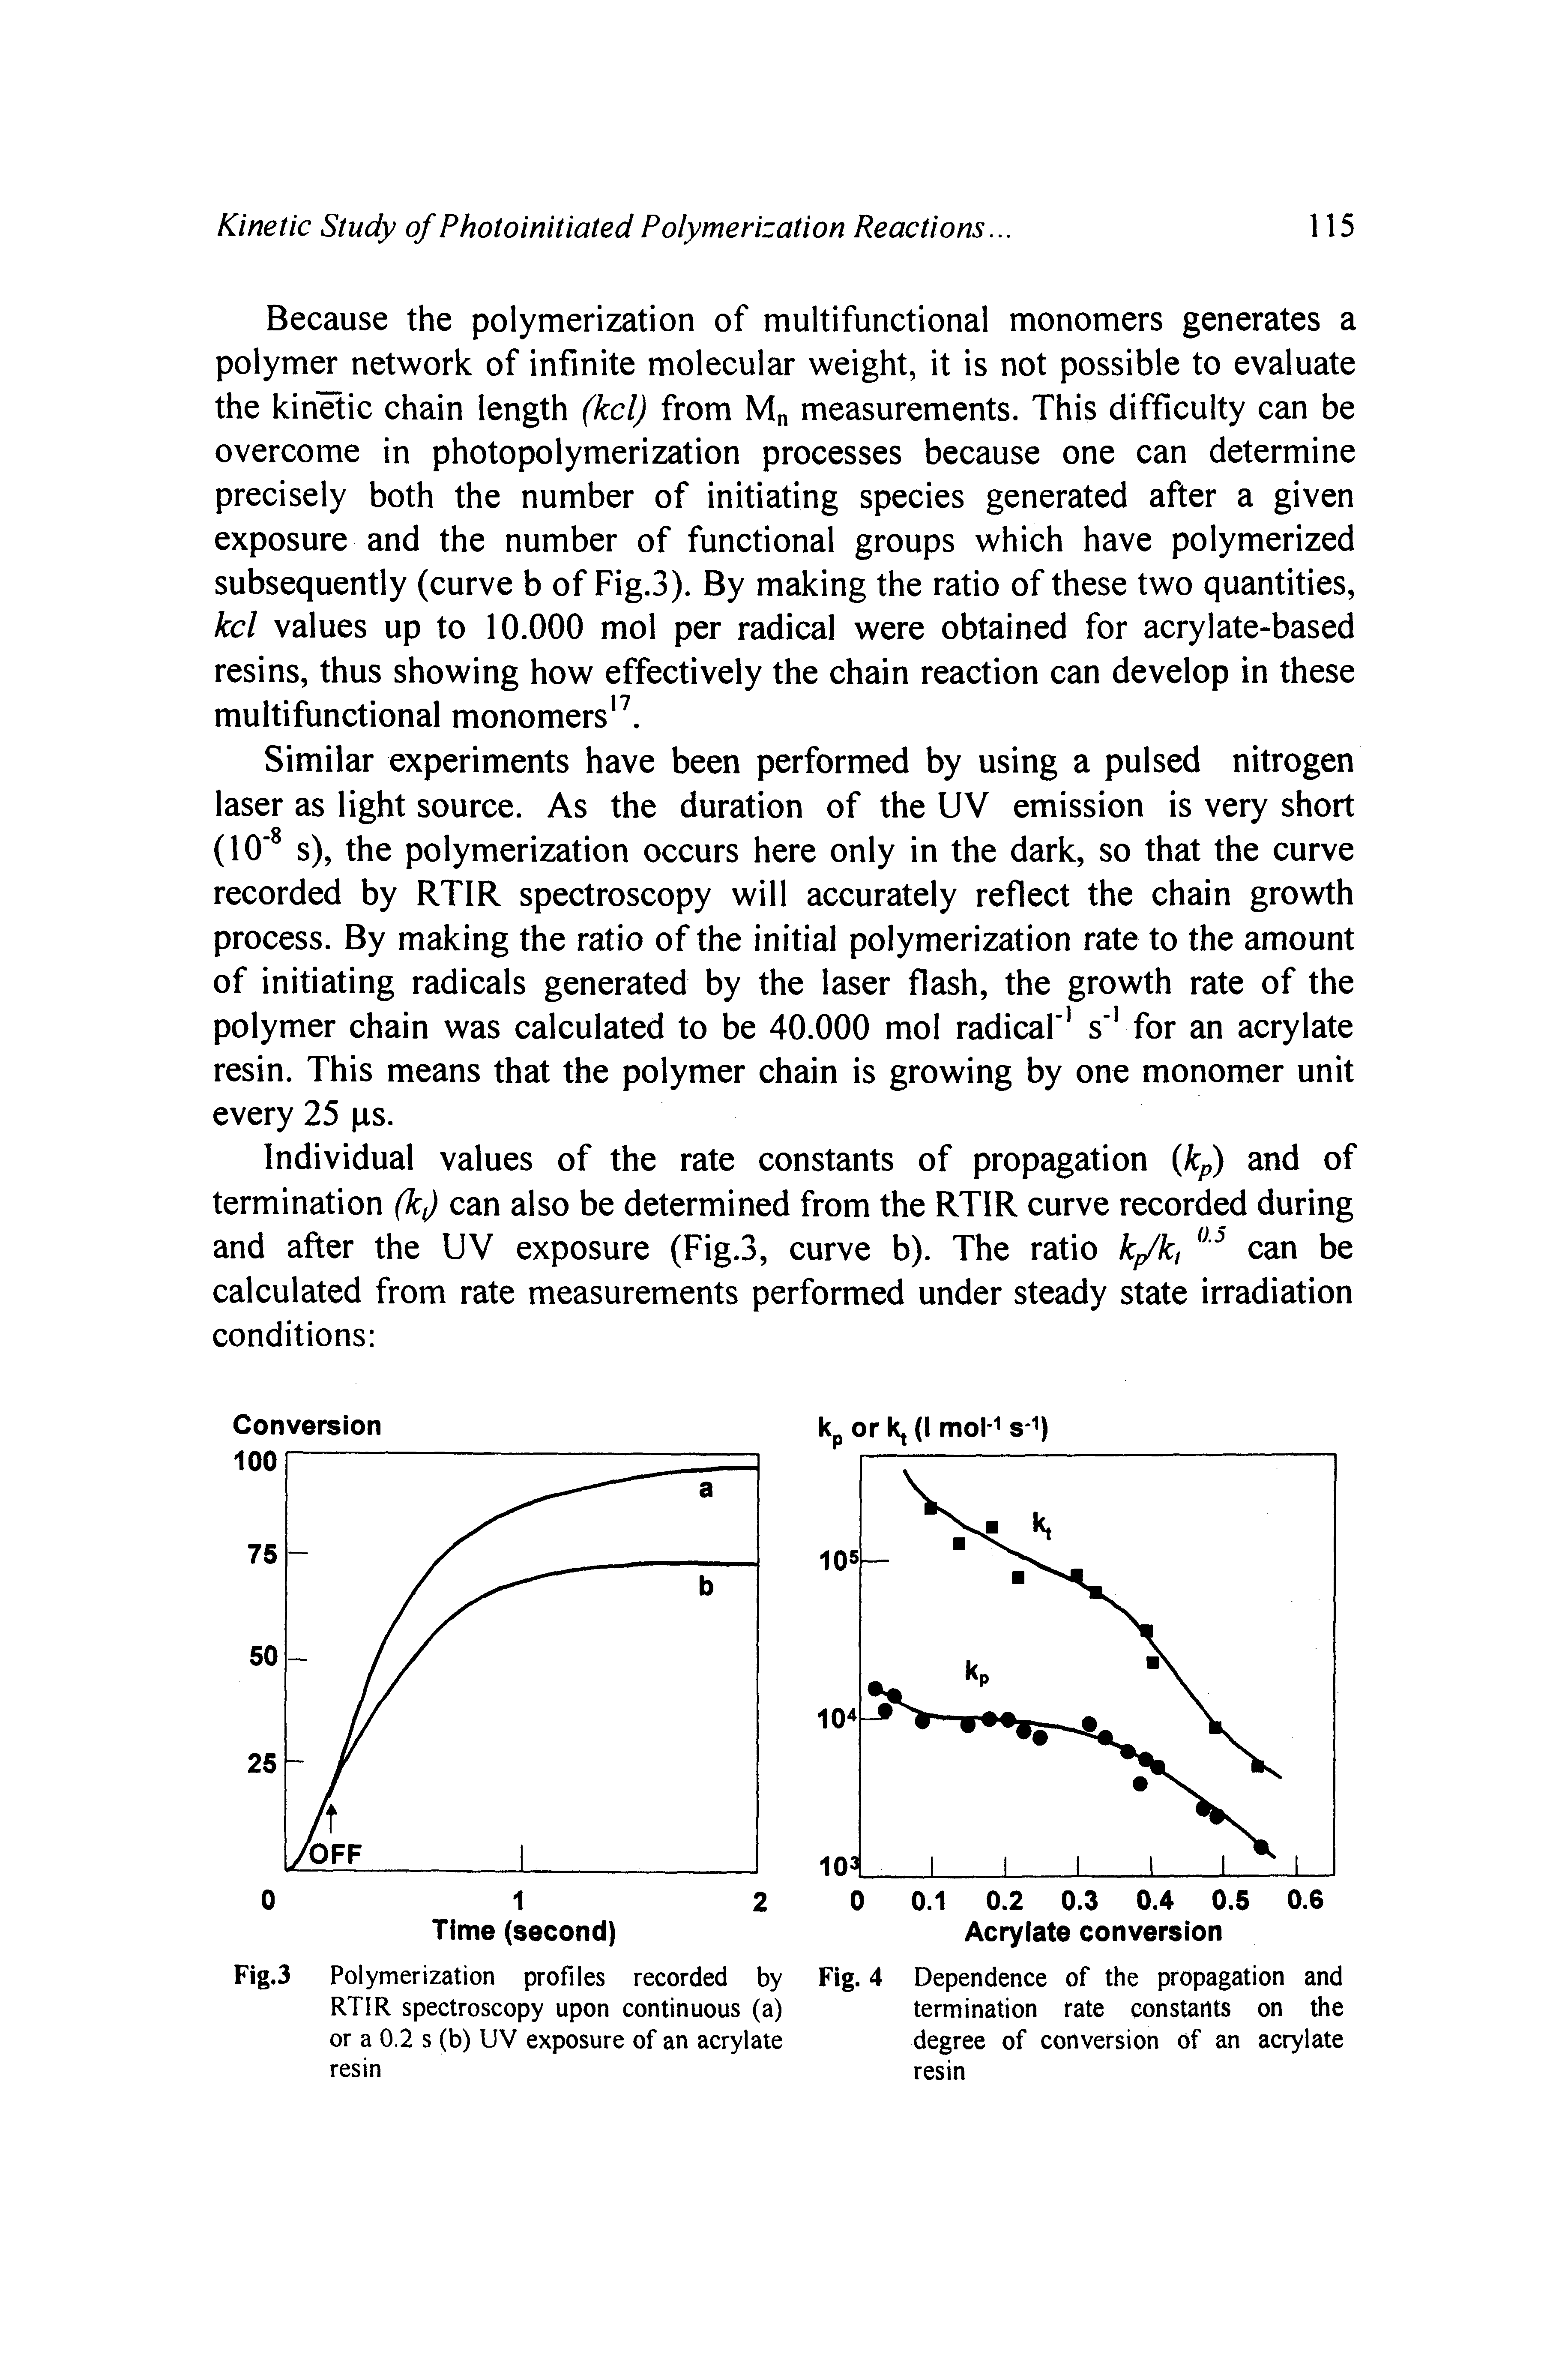 Fig. 4 Dependence of the propagation and termination rate constants on the degree of conversion of an acrylate resin...